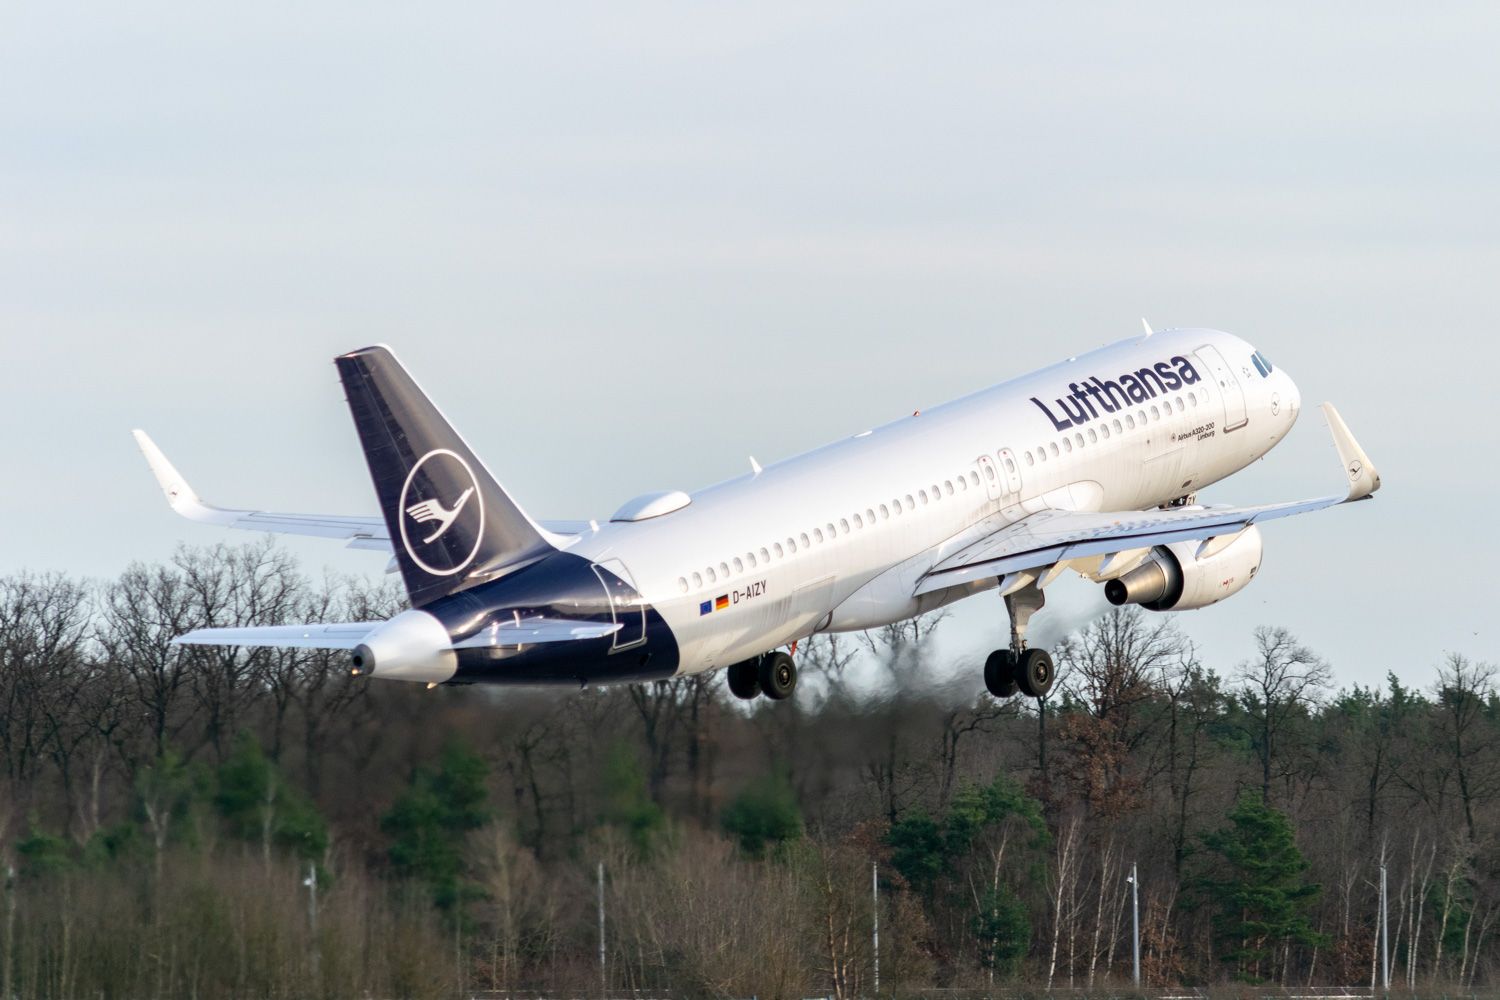 Flight Review: Domestic Economy On Lufthansa's Airbus A320